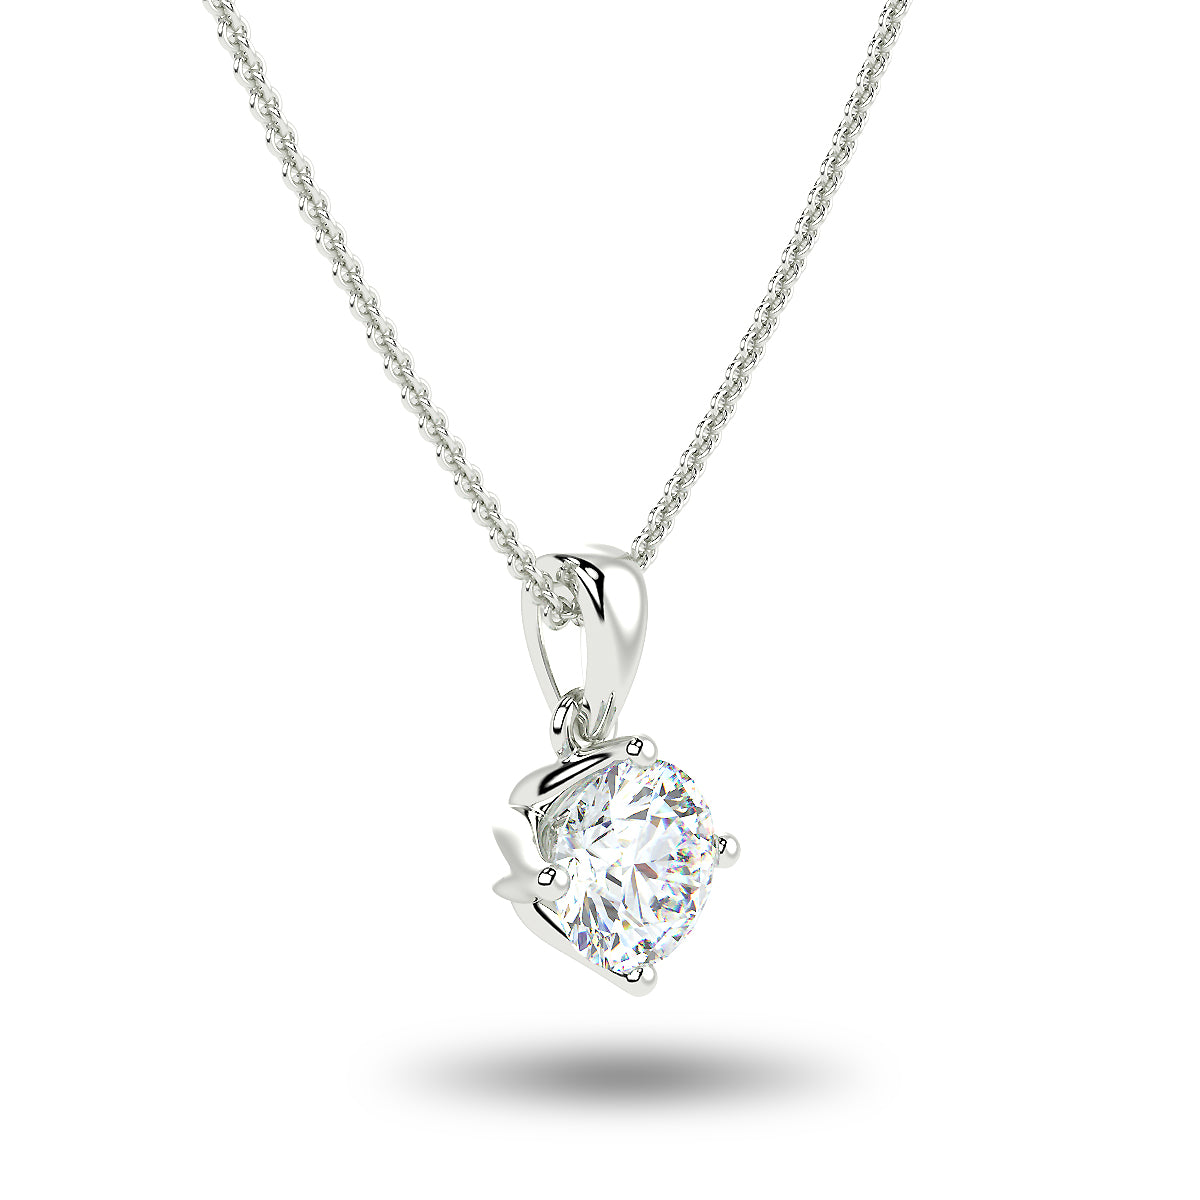 Sirius Solitaire Necklace - White Gold (0.80 Ct. Tw.)